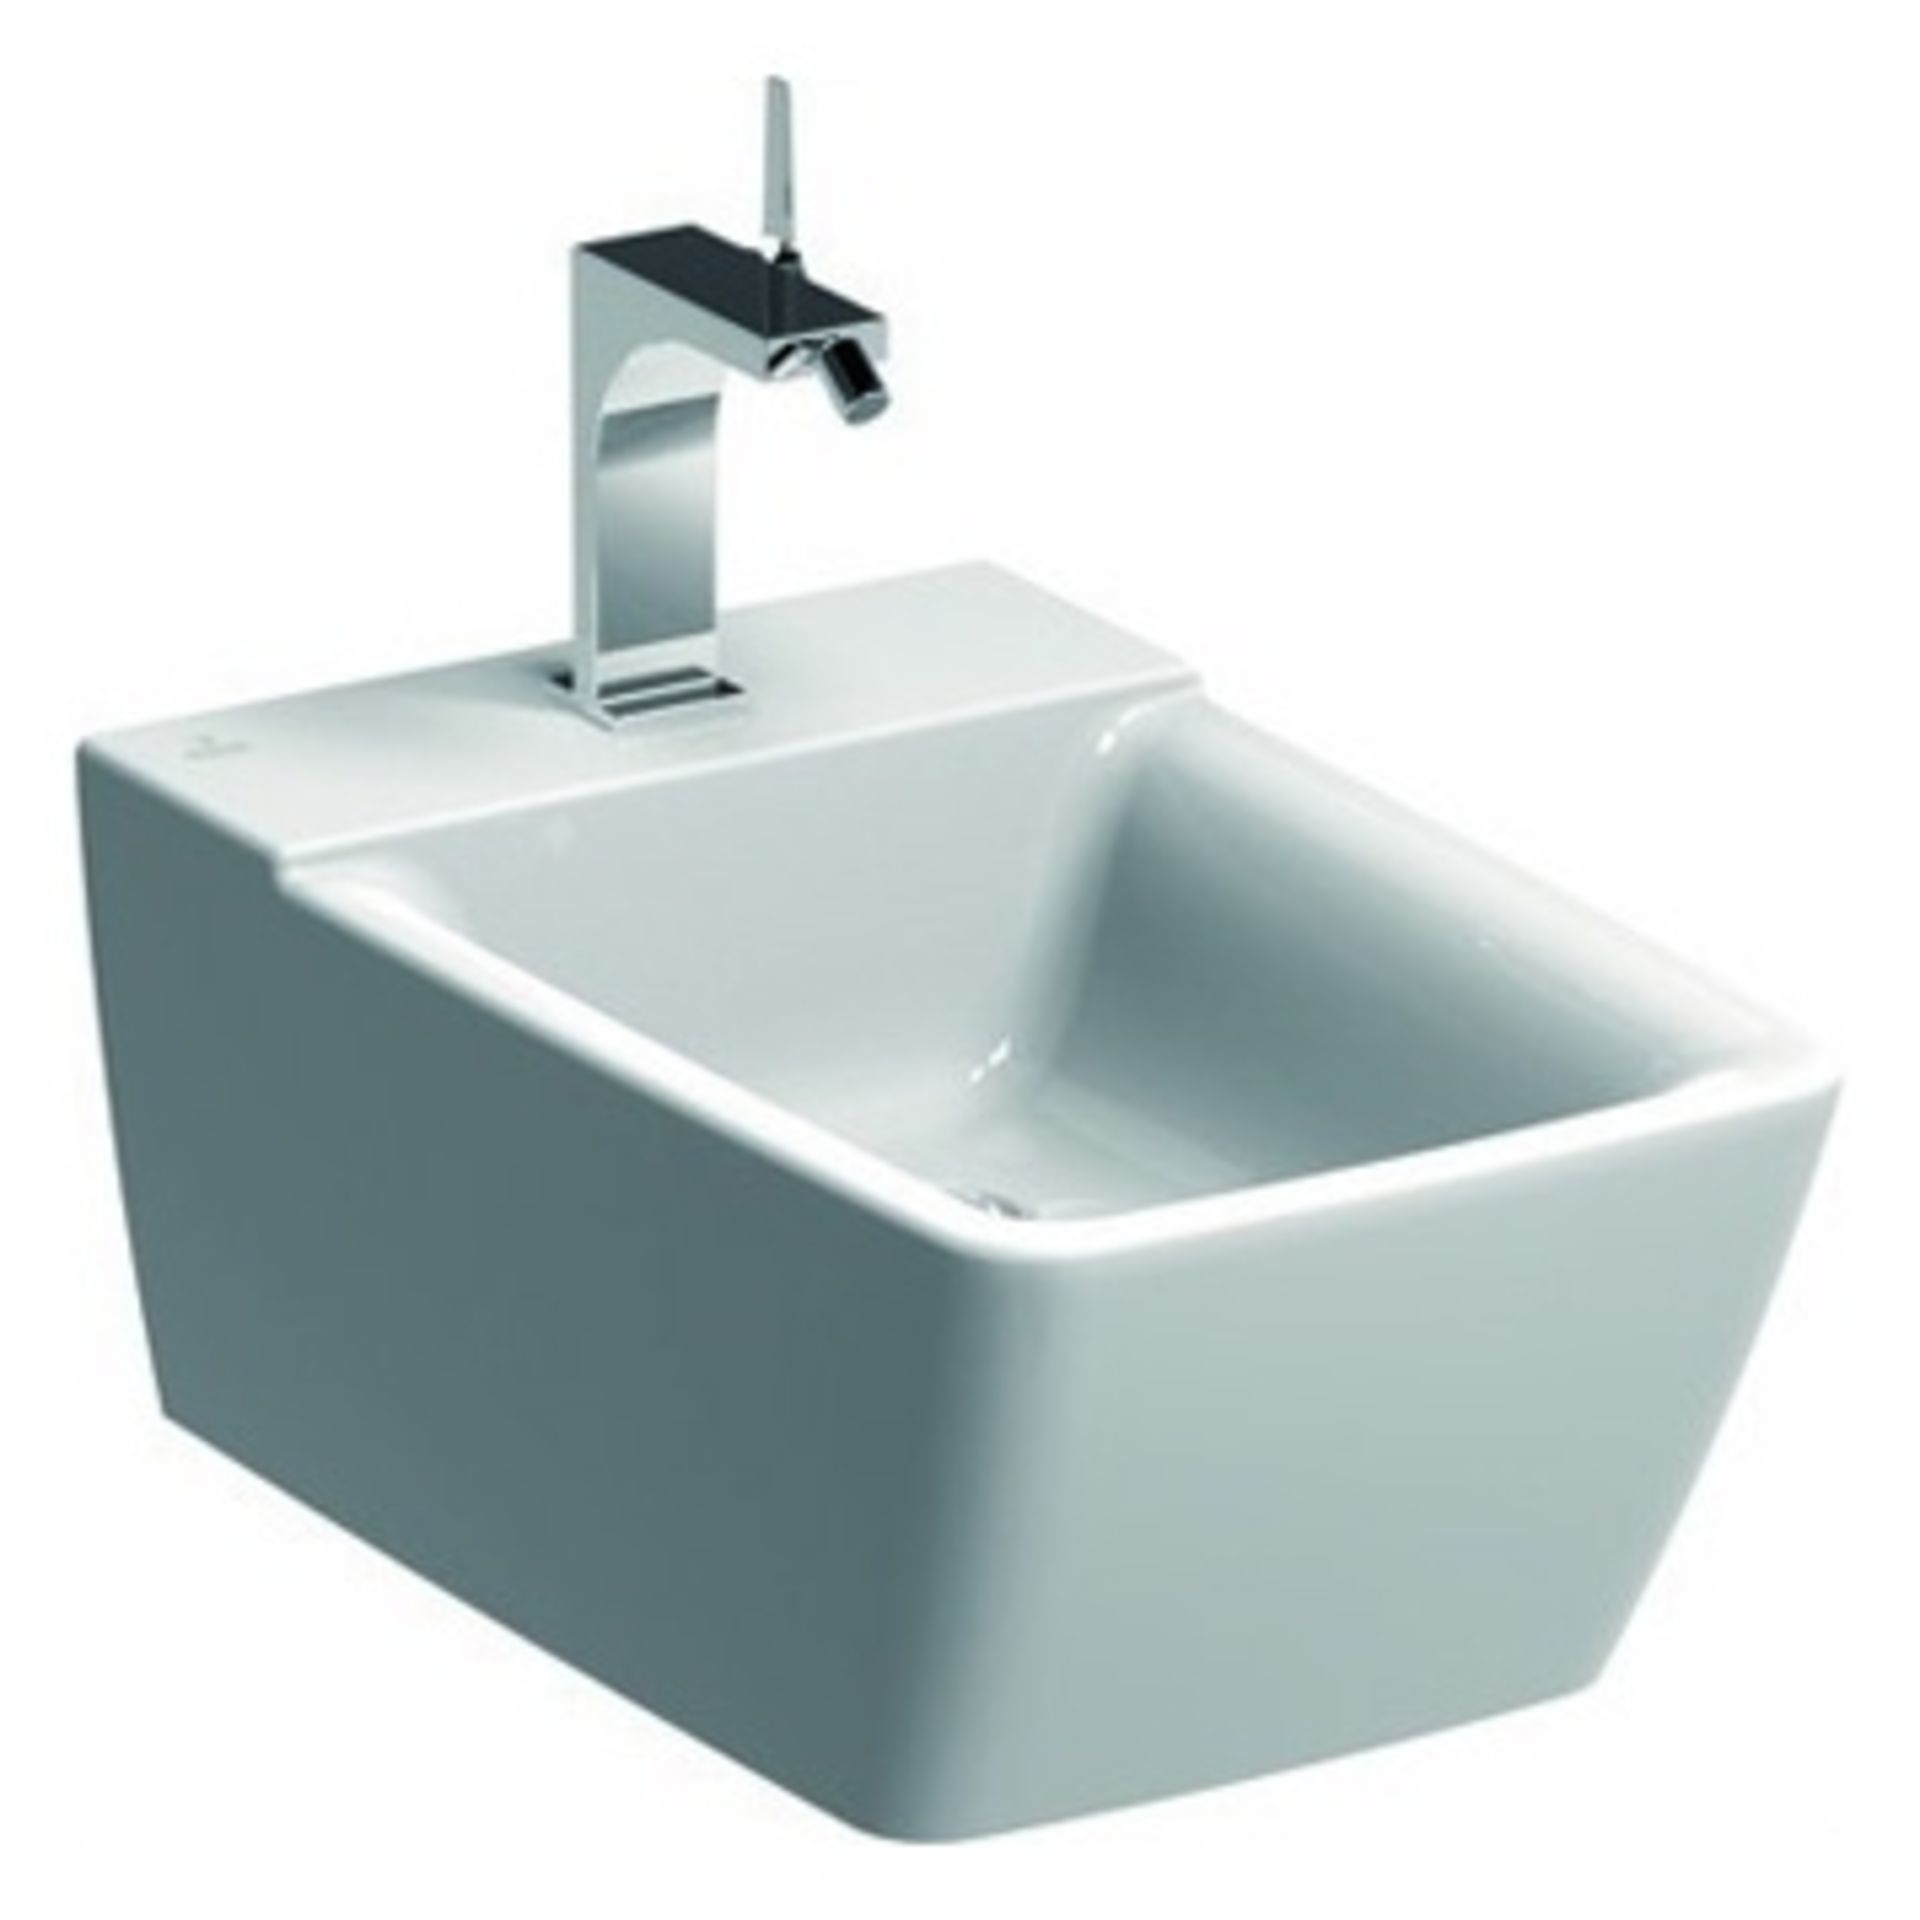 (XL37) Xeno 540mm Bidet Wall Hung. RRP £389.99. A premium bathroom series of products with re...( - Image 2 of 2